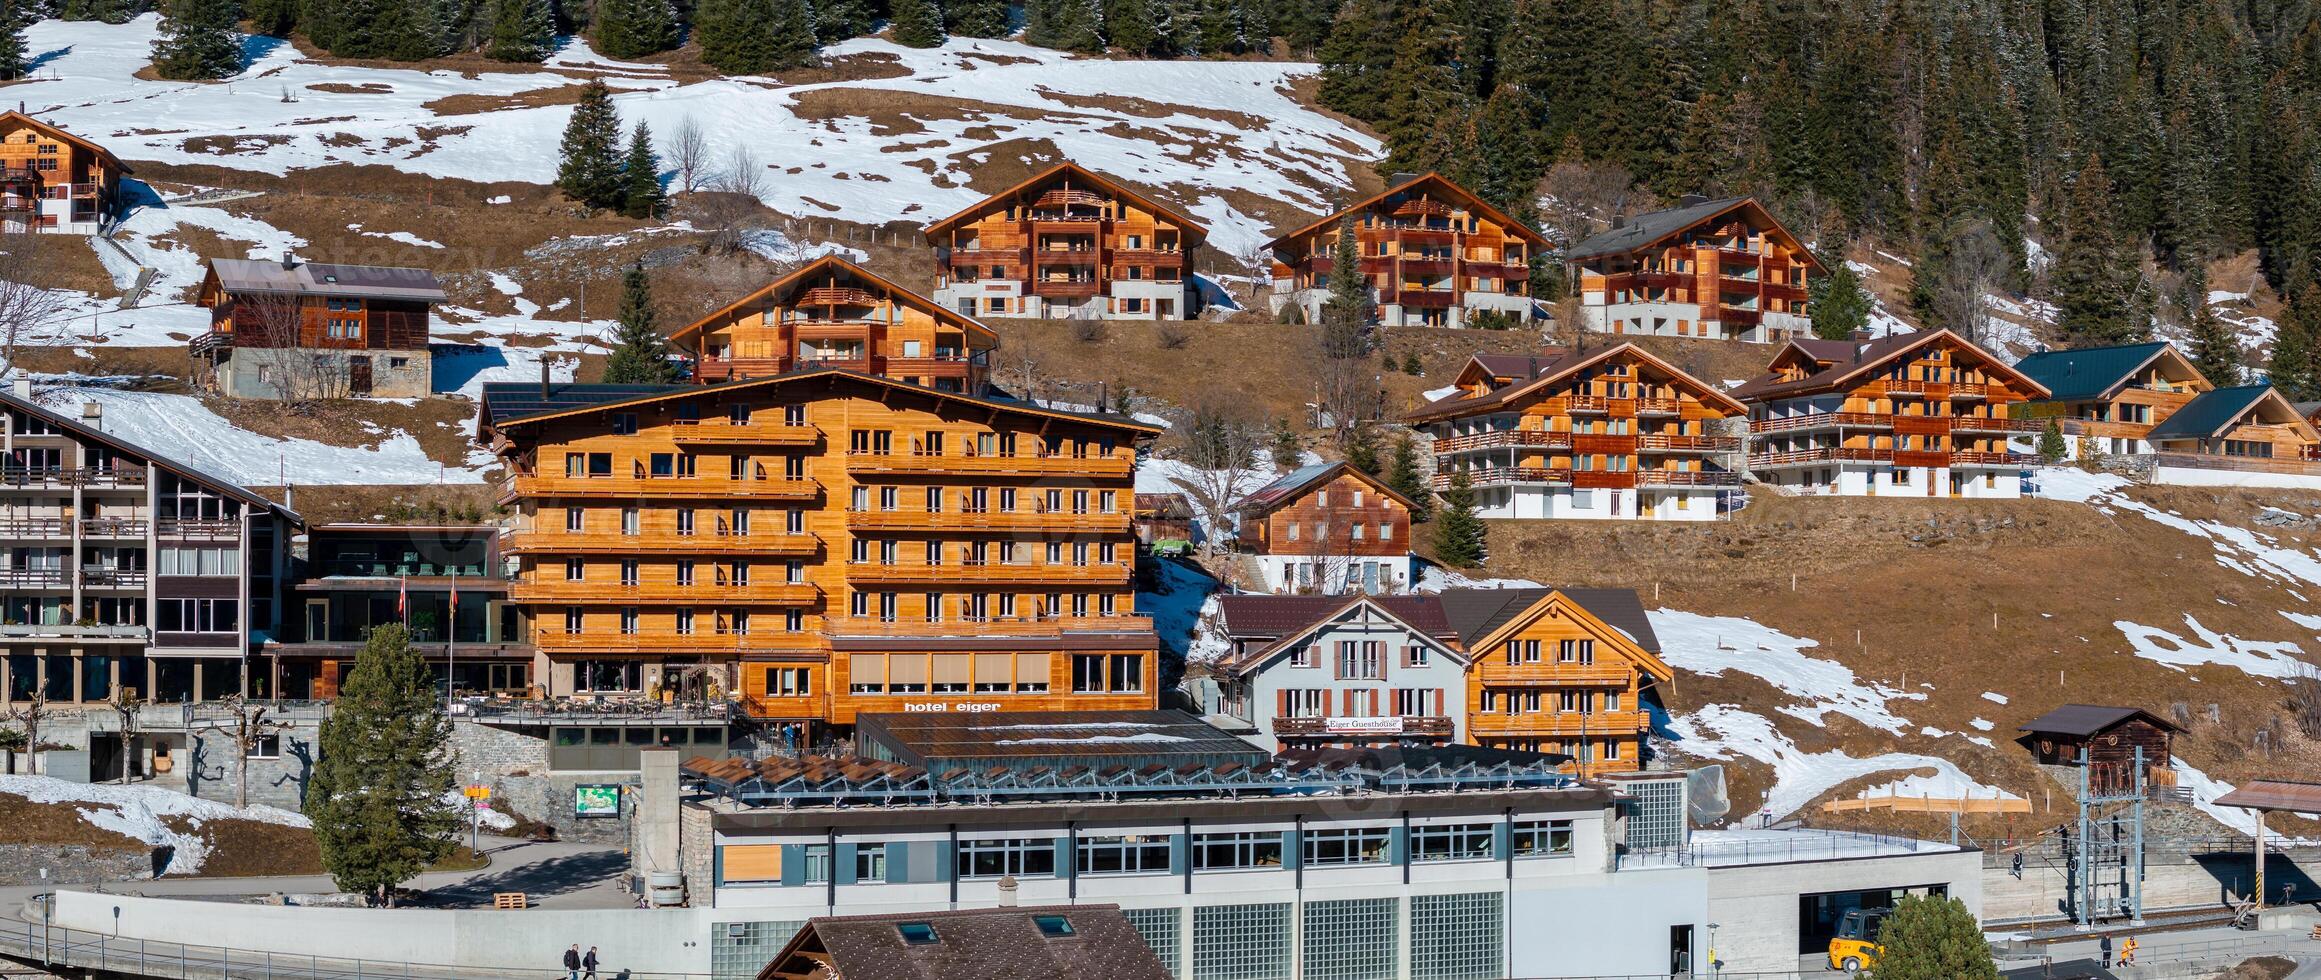 Panoramic View of Murren, Switzerland  Chalet Style Buildings and Hotel Eiger photo